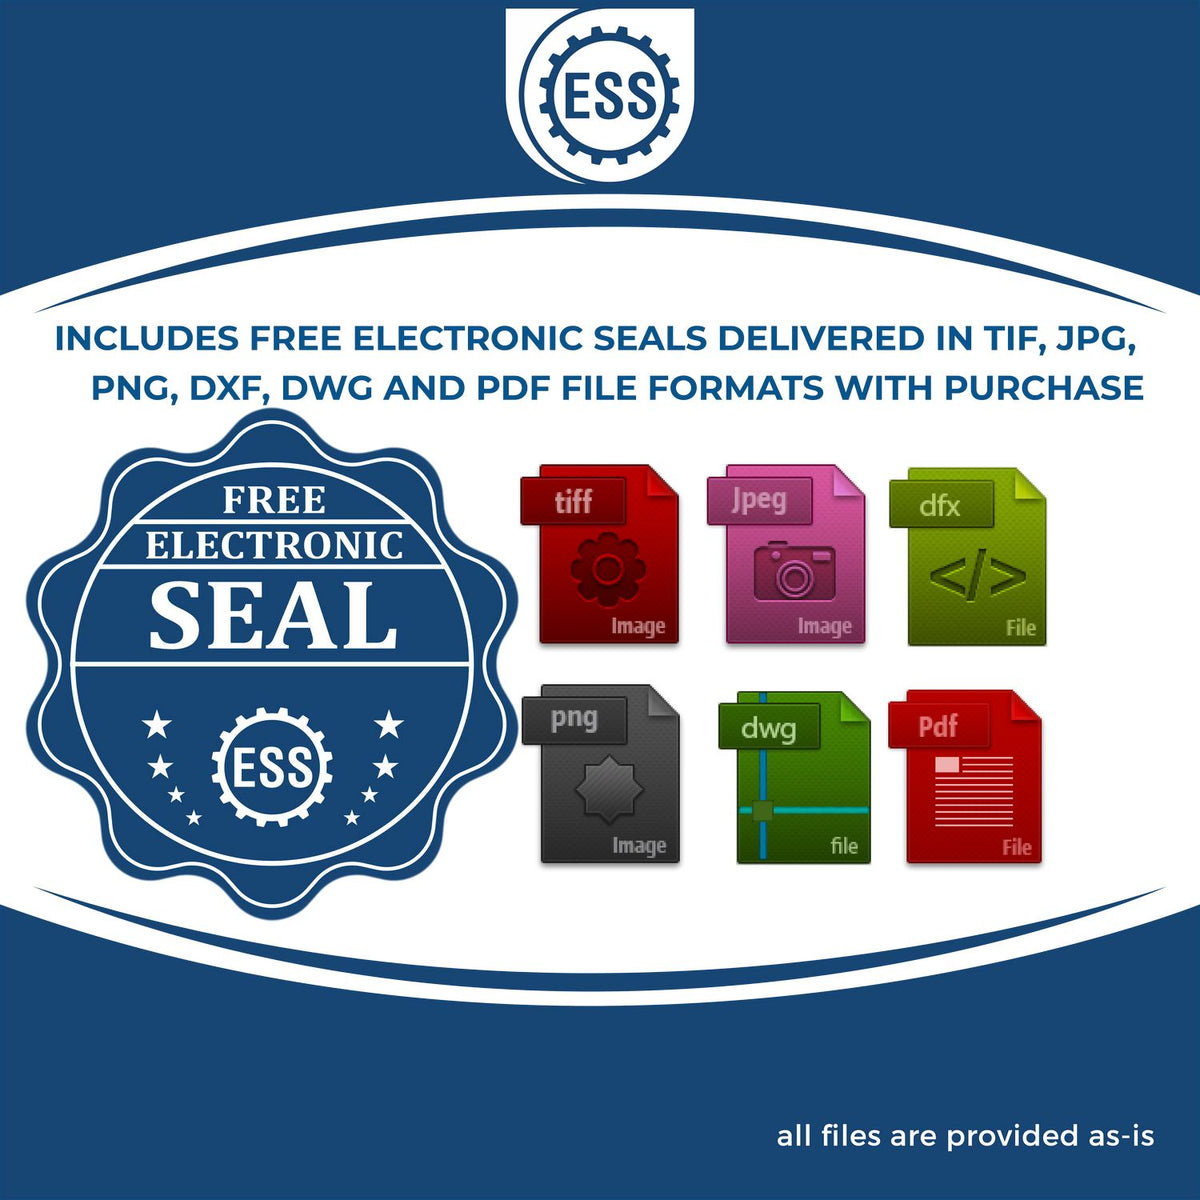 An infographic for the free electronic seal for the Maine Geologist Desk Seal illustrating the different file type icons such as DXF, DWG, TIF, JPG and PNG.